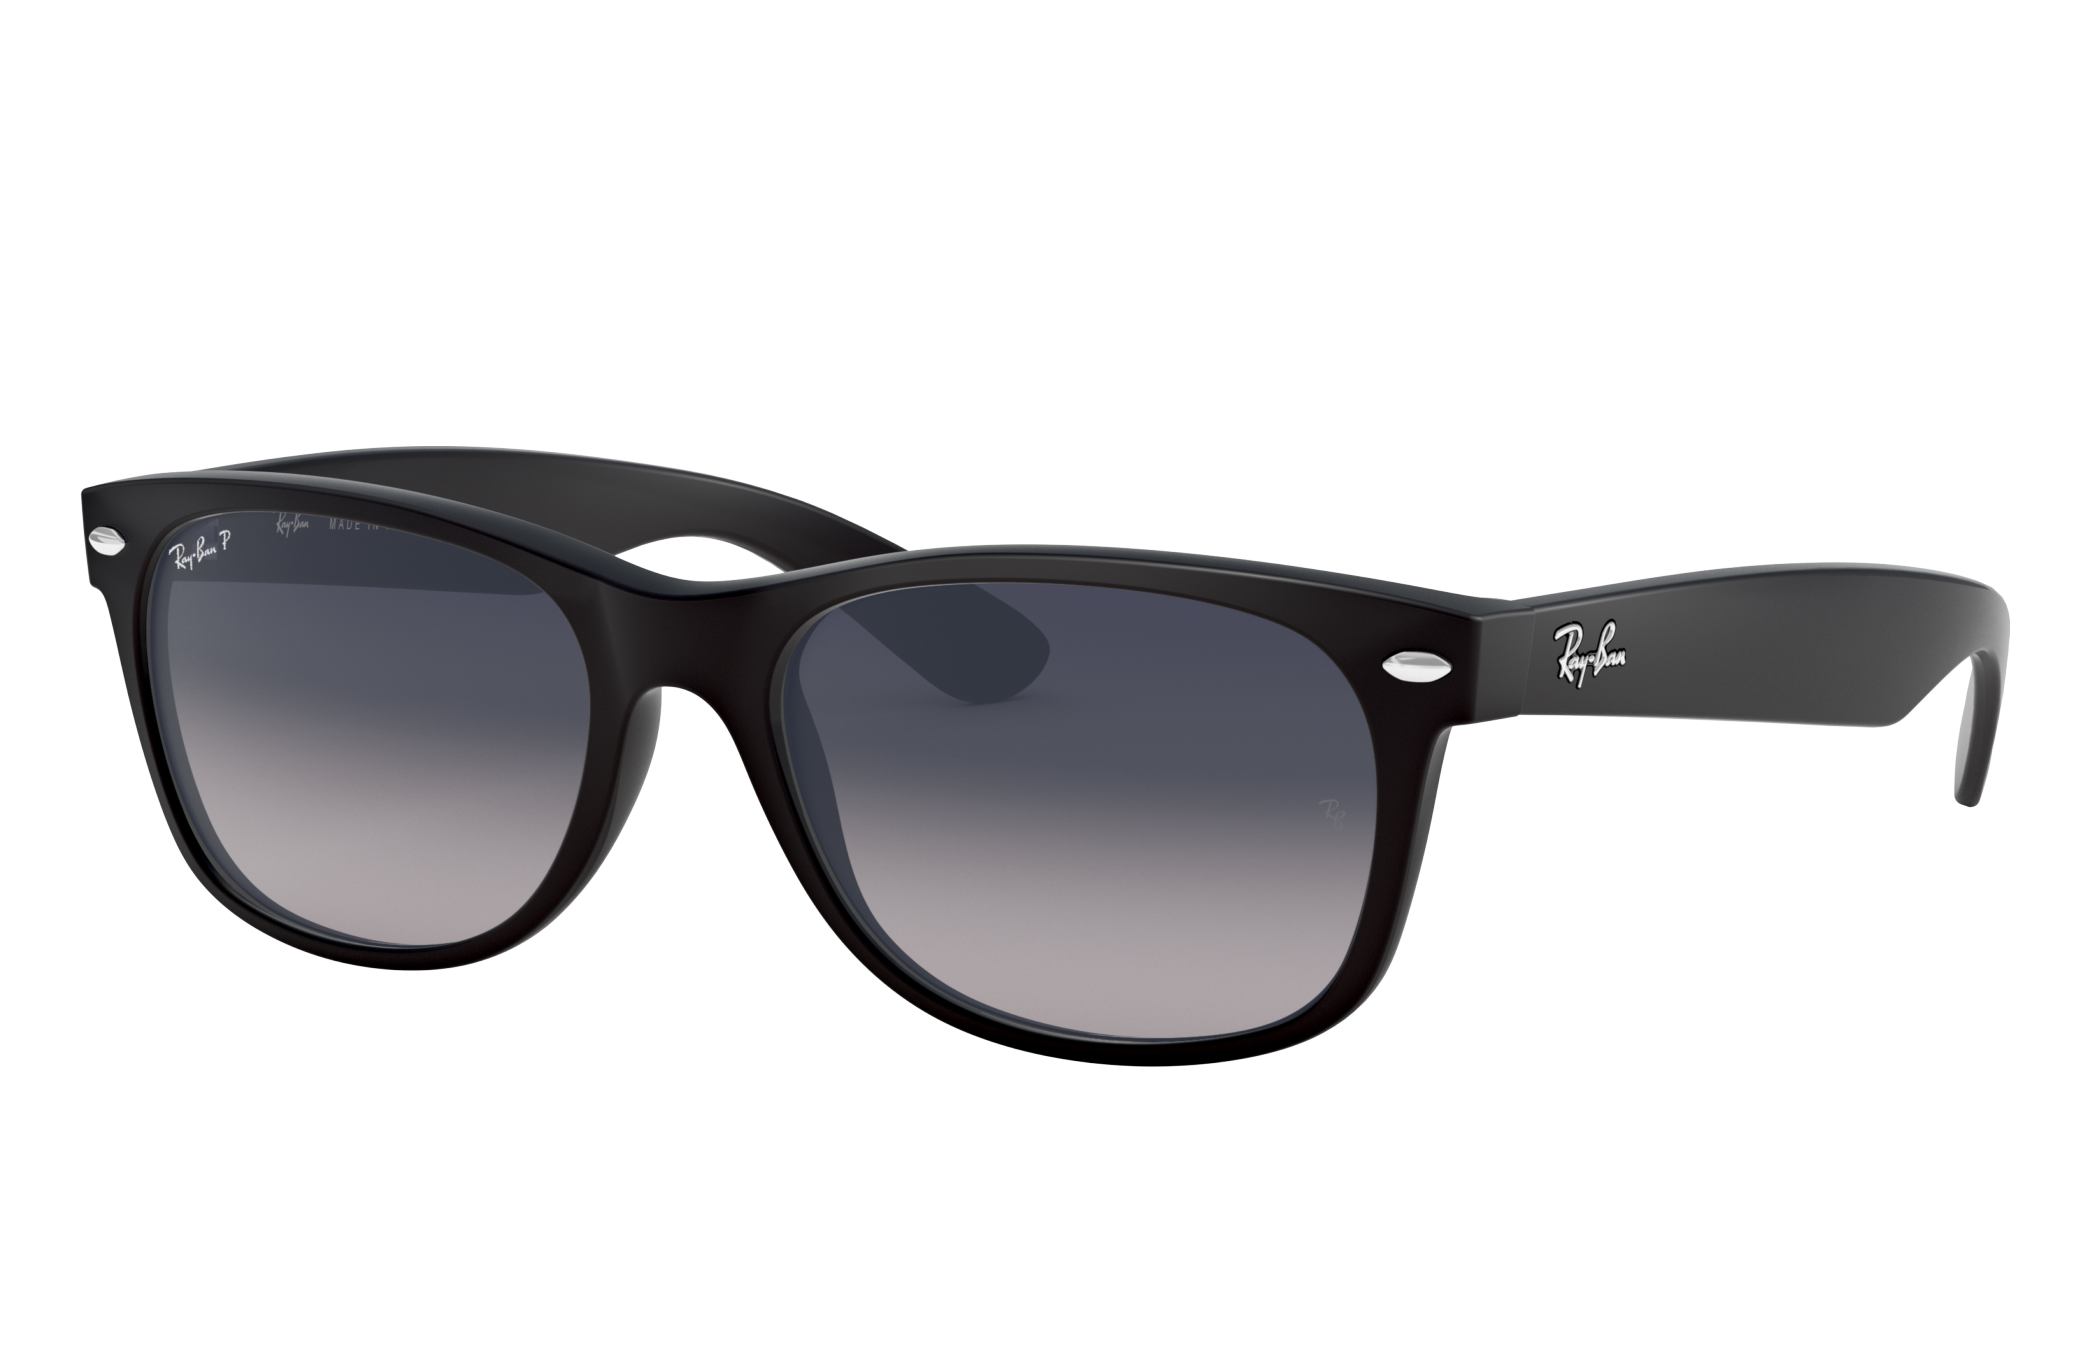 New Wayfarer Classic Sunglasses In Black And Blue Grey Ray Ban®